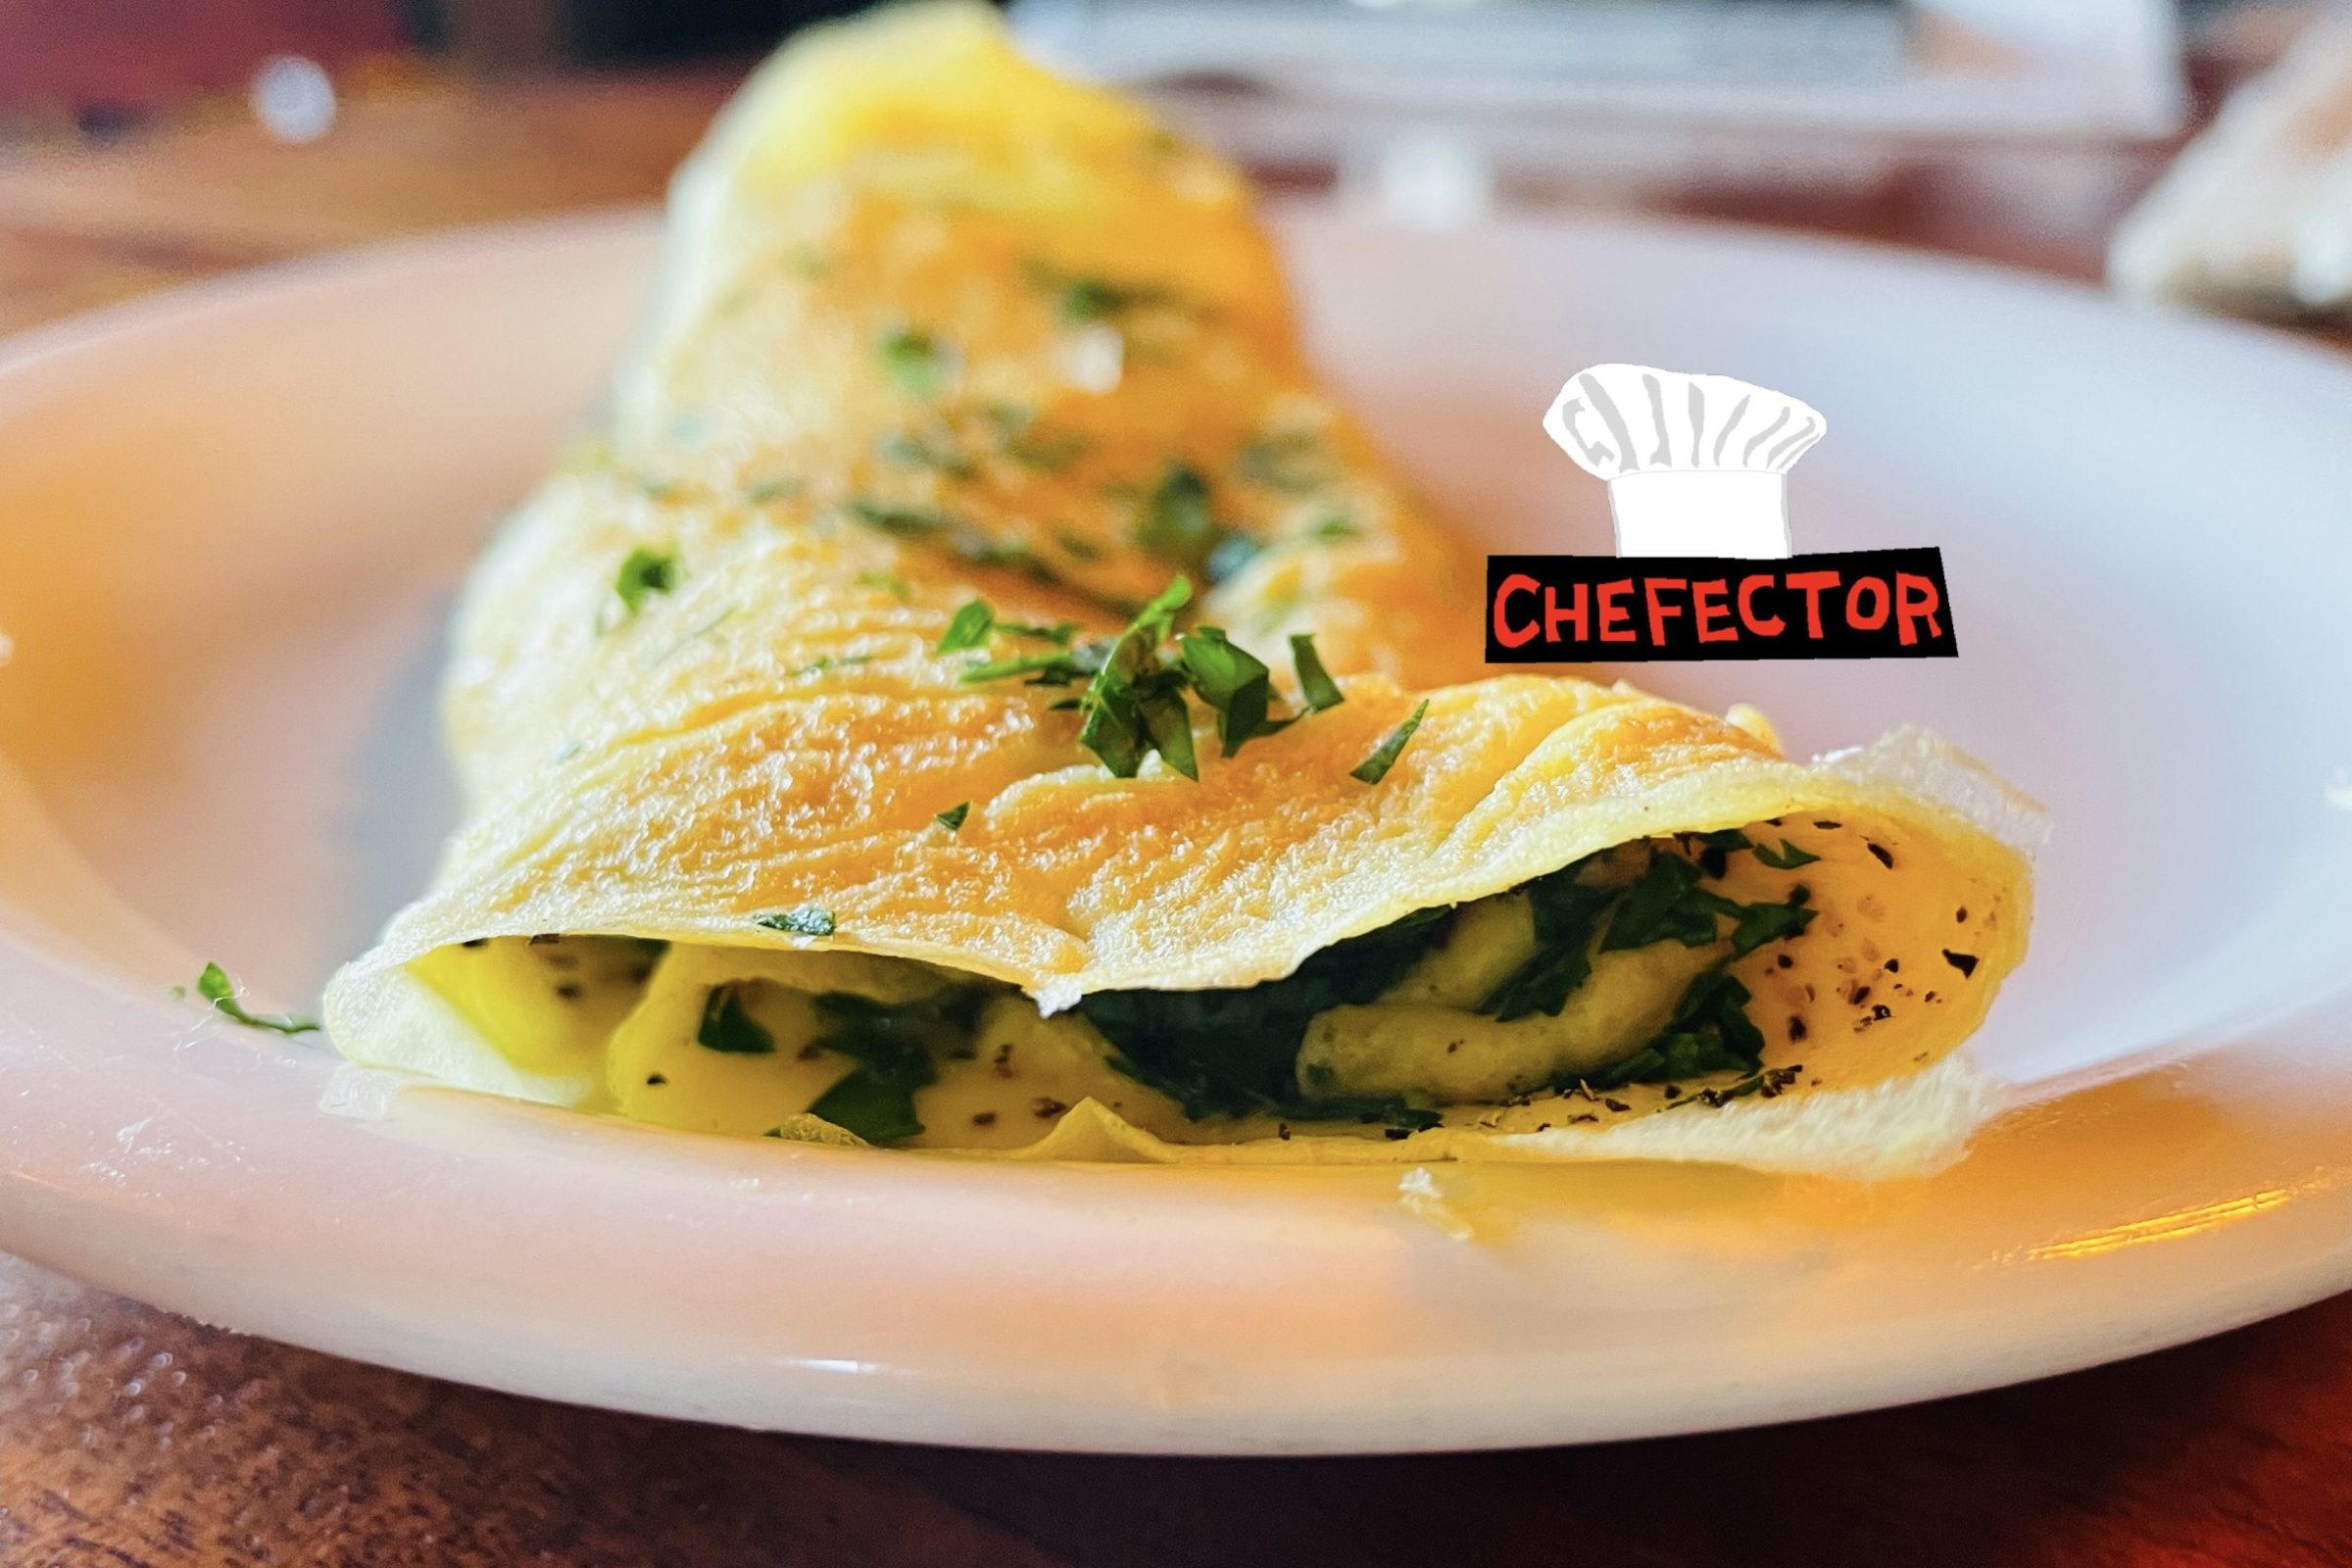 An omelet with herbs on it